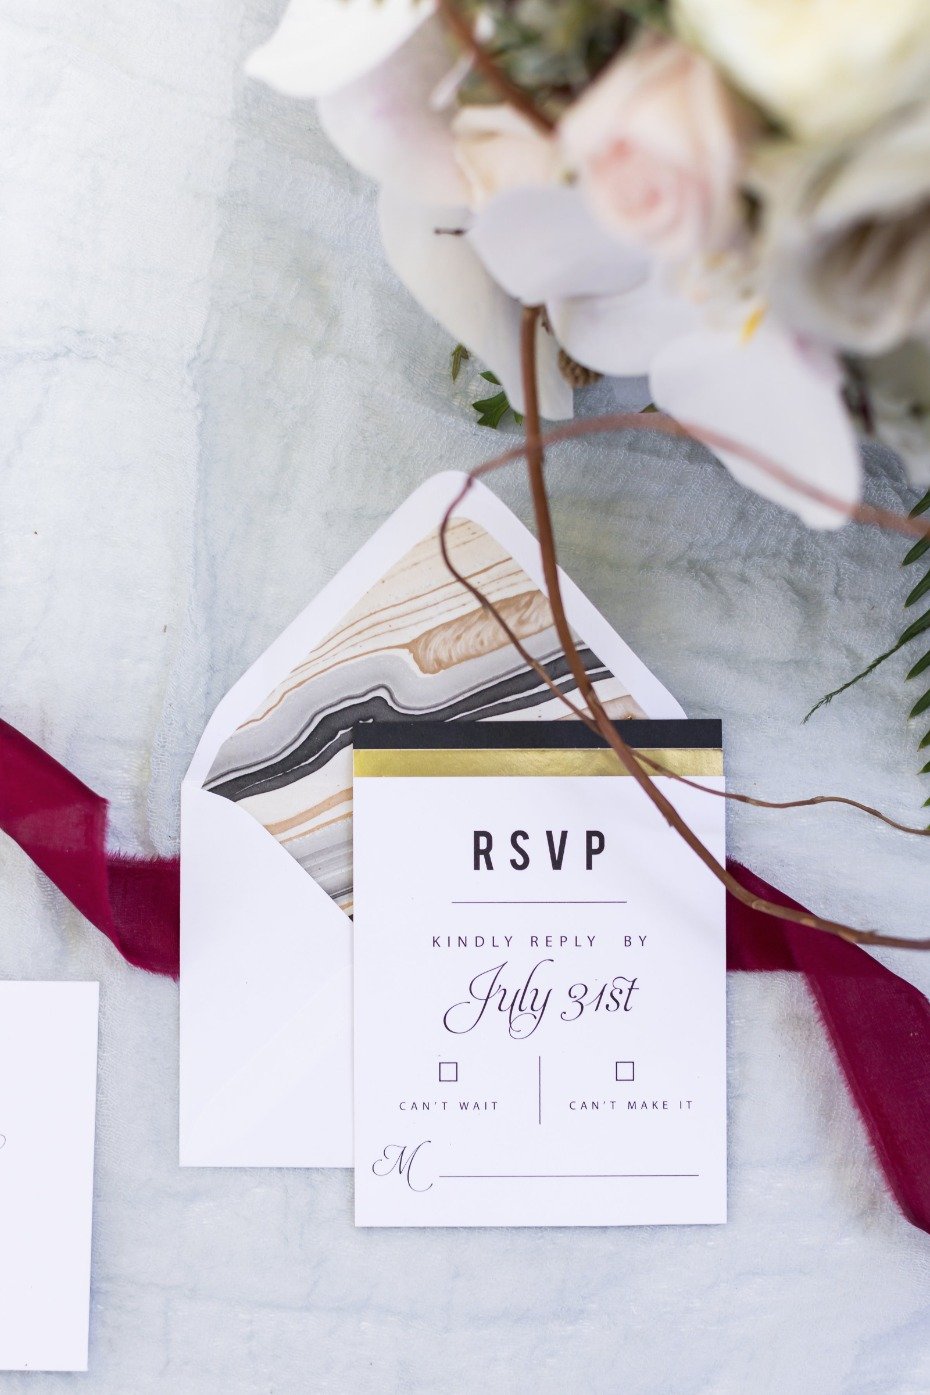 RSVP for your wedding